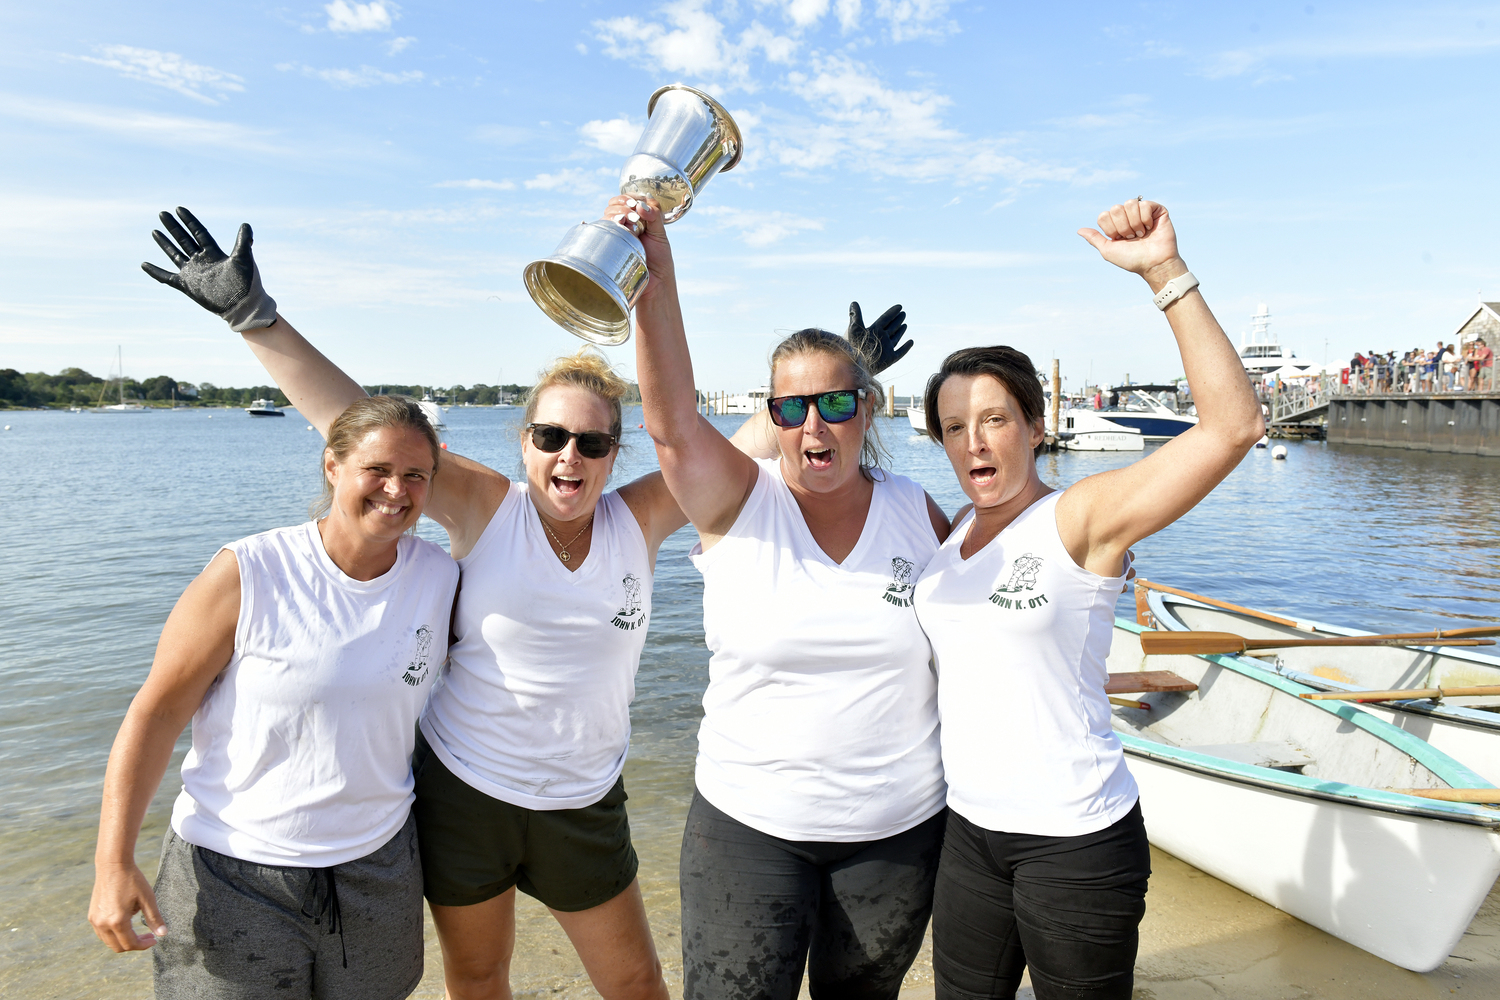 Shelly Cottrell, Shawn Mitchell, Robyn Mott and Karin Schroeder of the John K. Ott Women's Team took the Whaleboat Race Cup at HarborFest on Sunday.  DANA SHAW